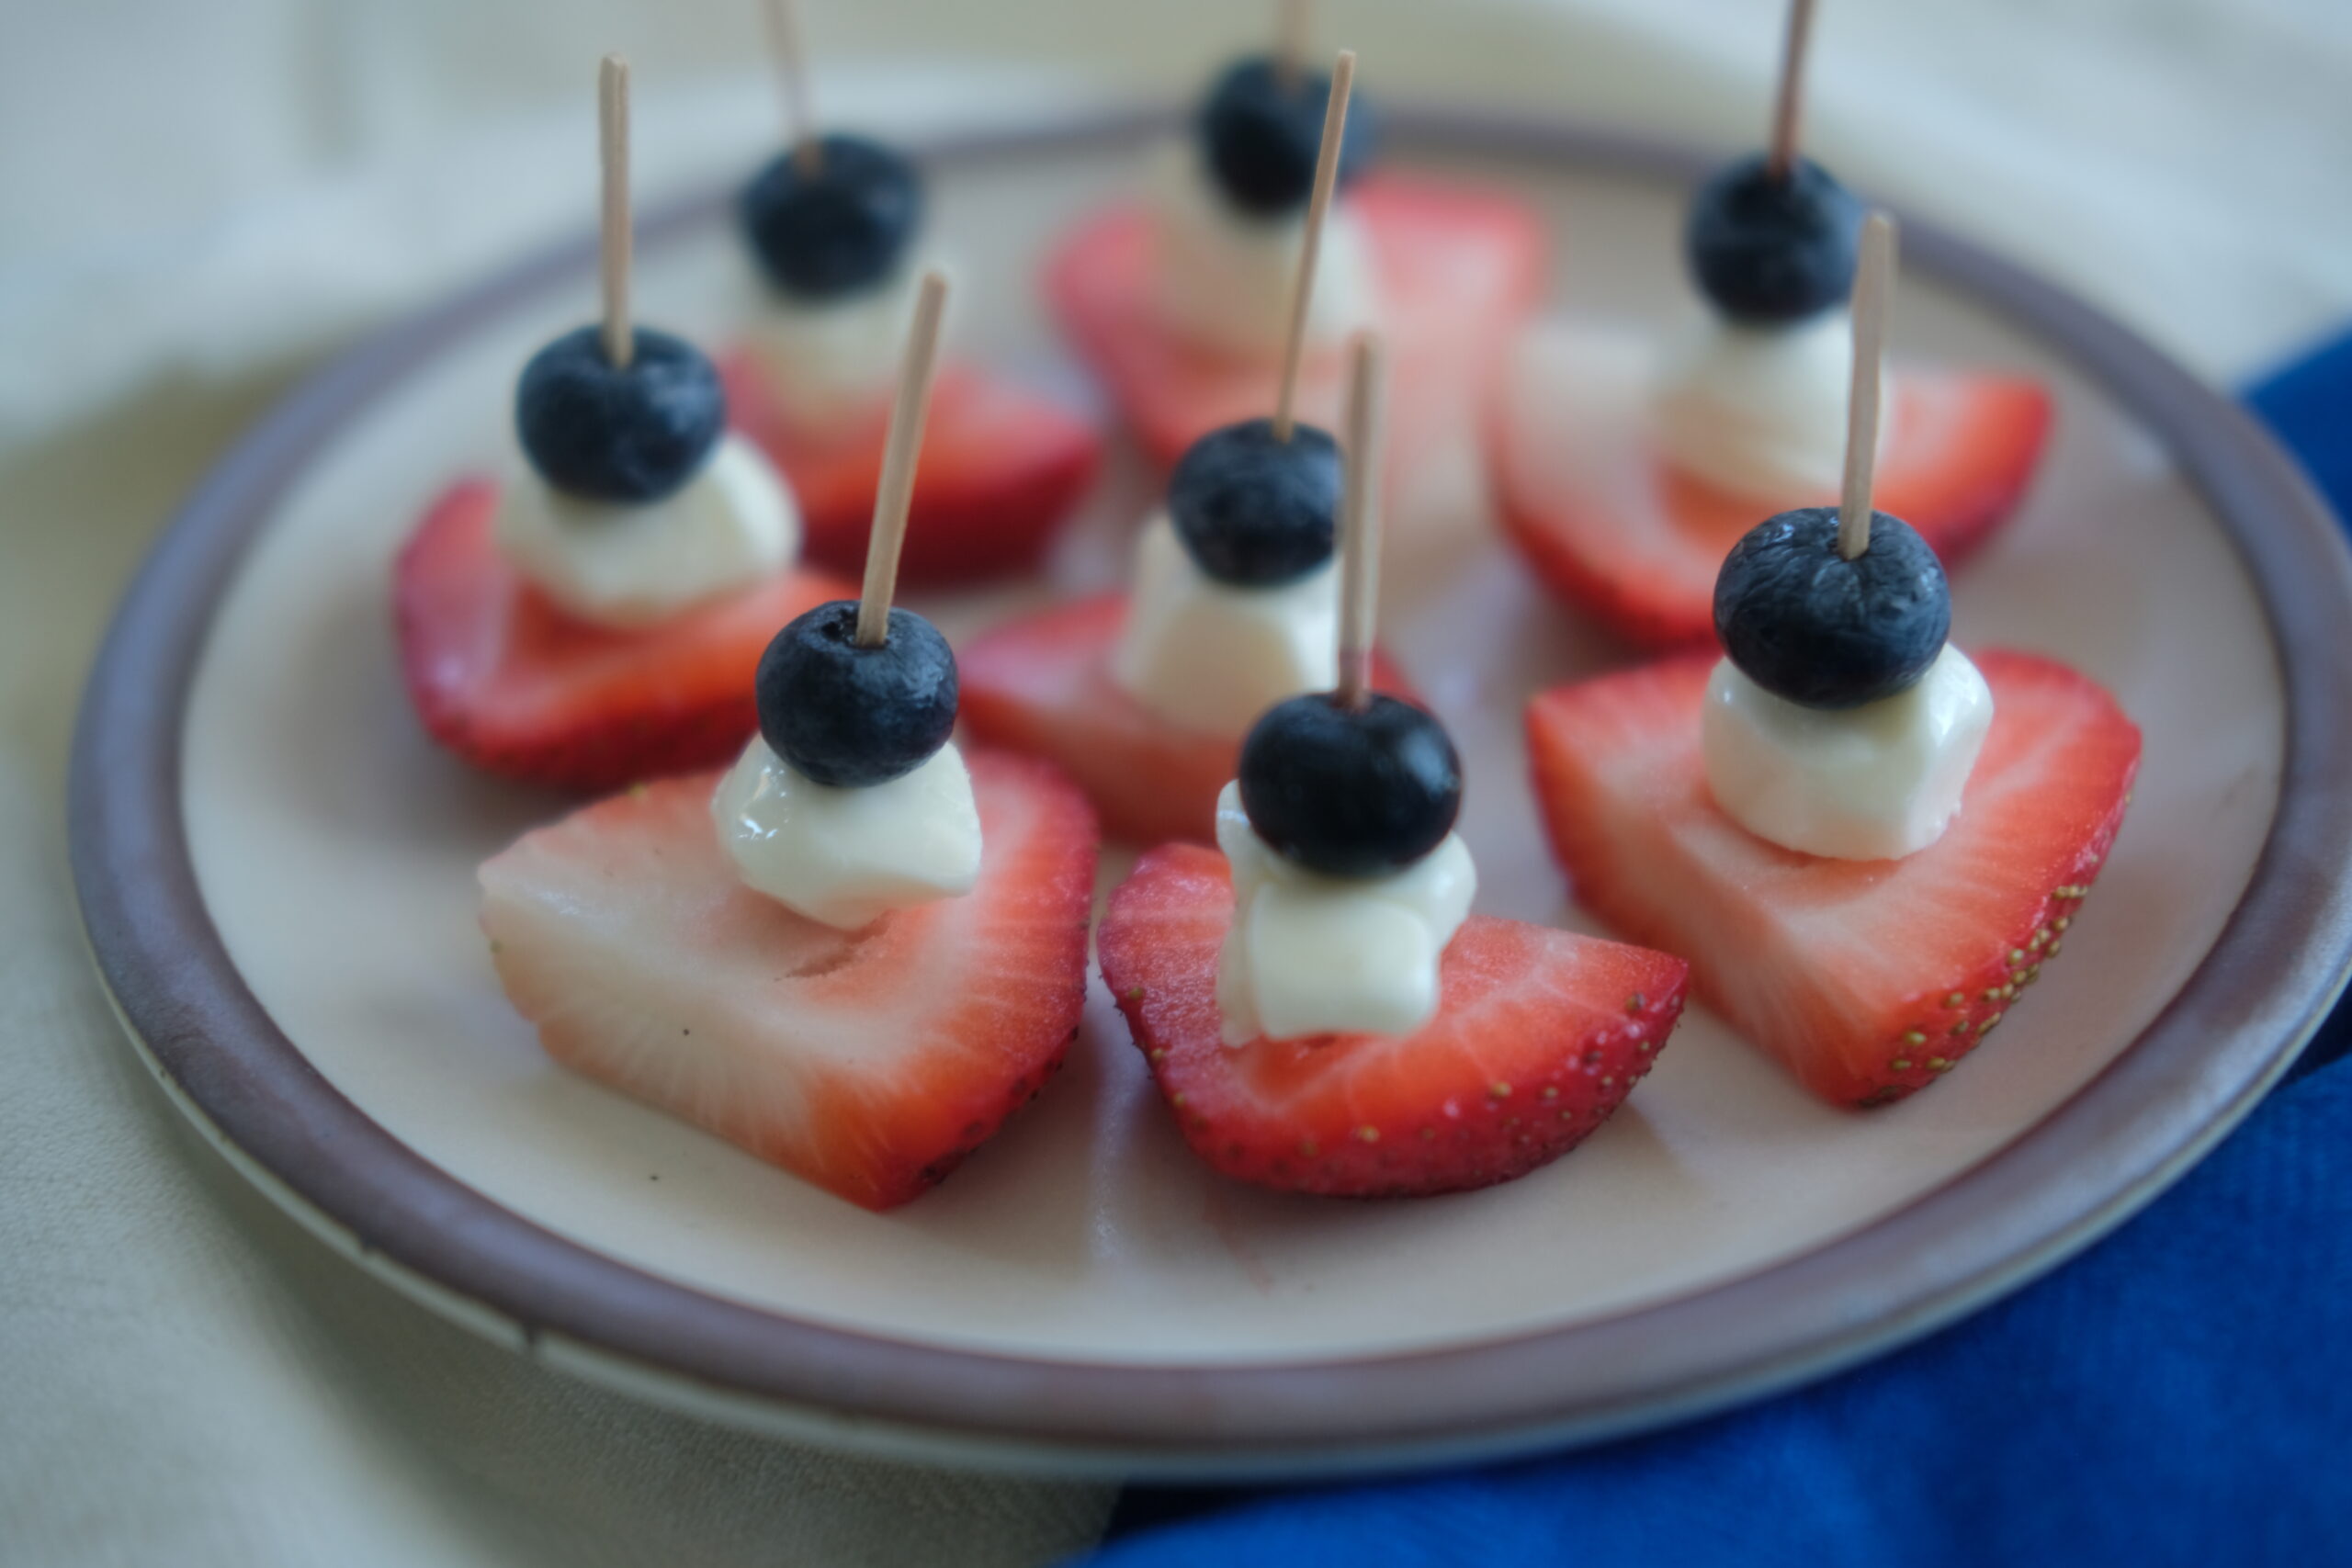 If you need a last minute Fourth of July snack to make your table extra patriotic, we have the easiest recipe.